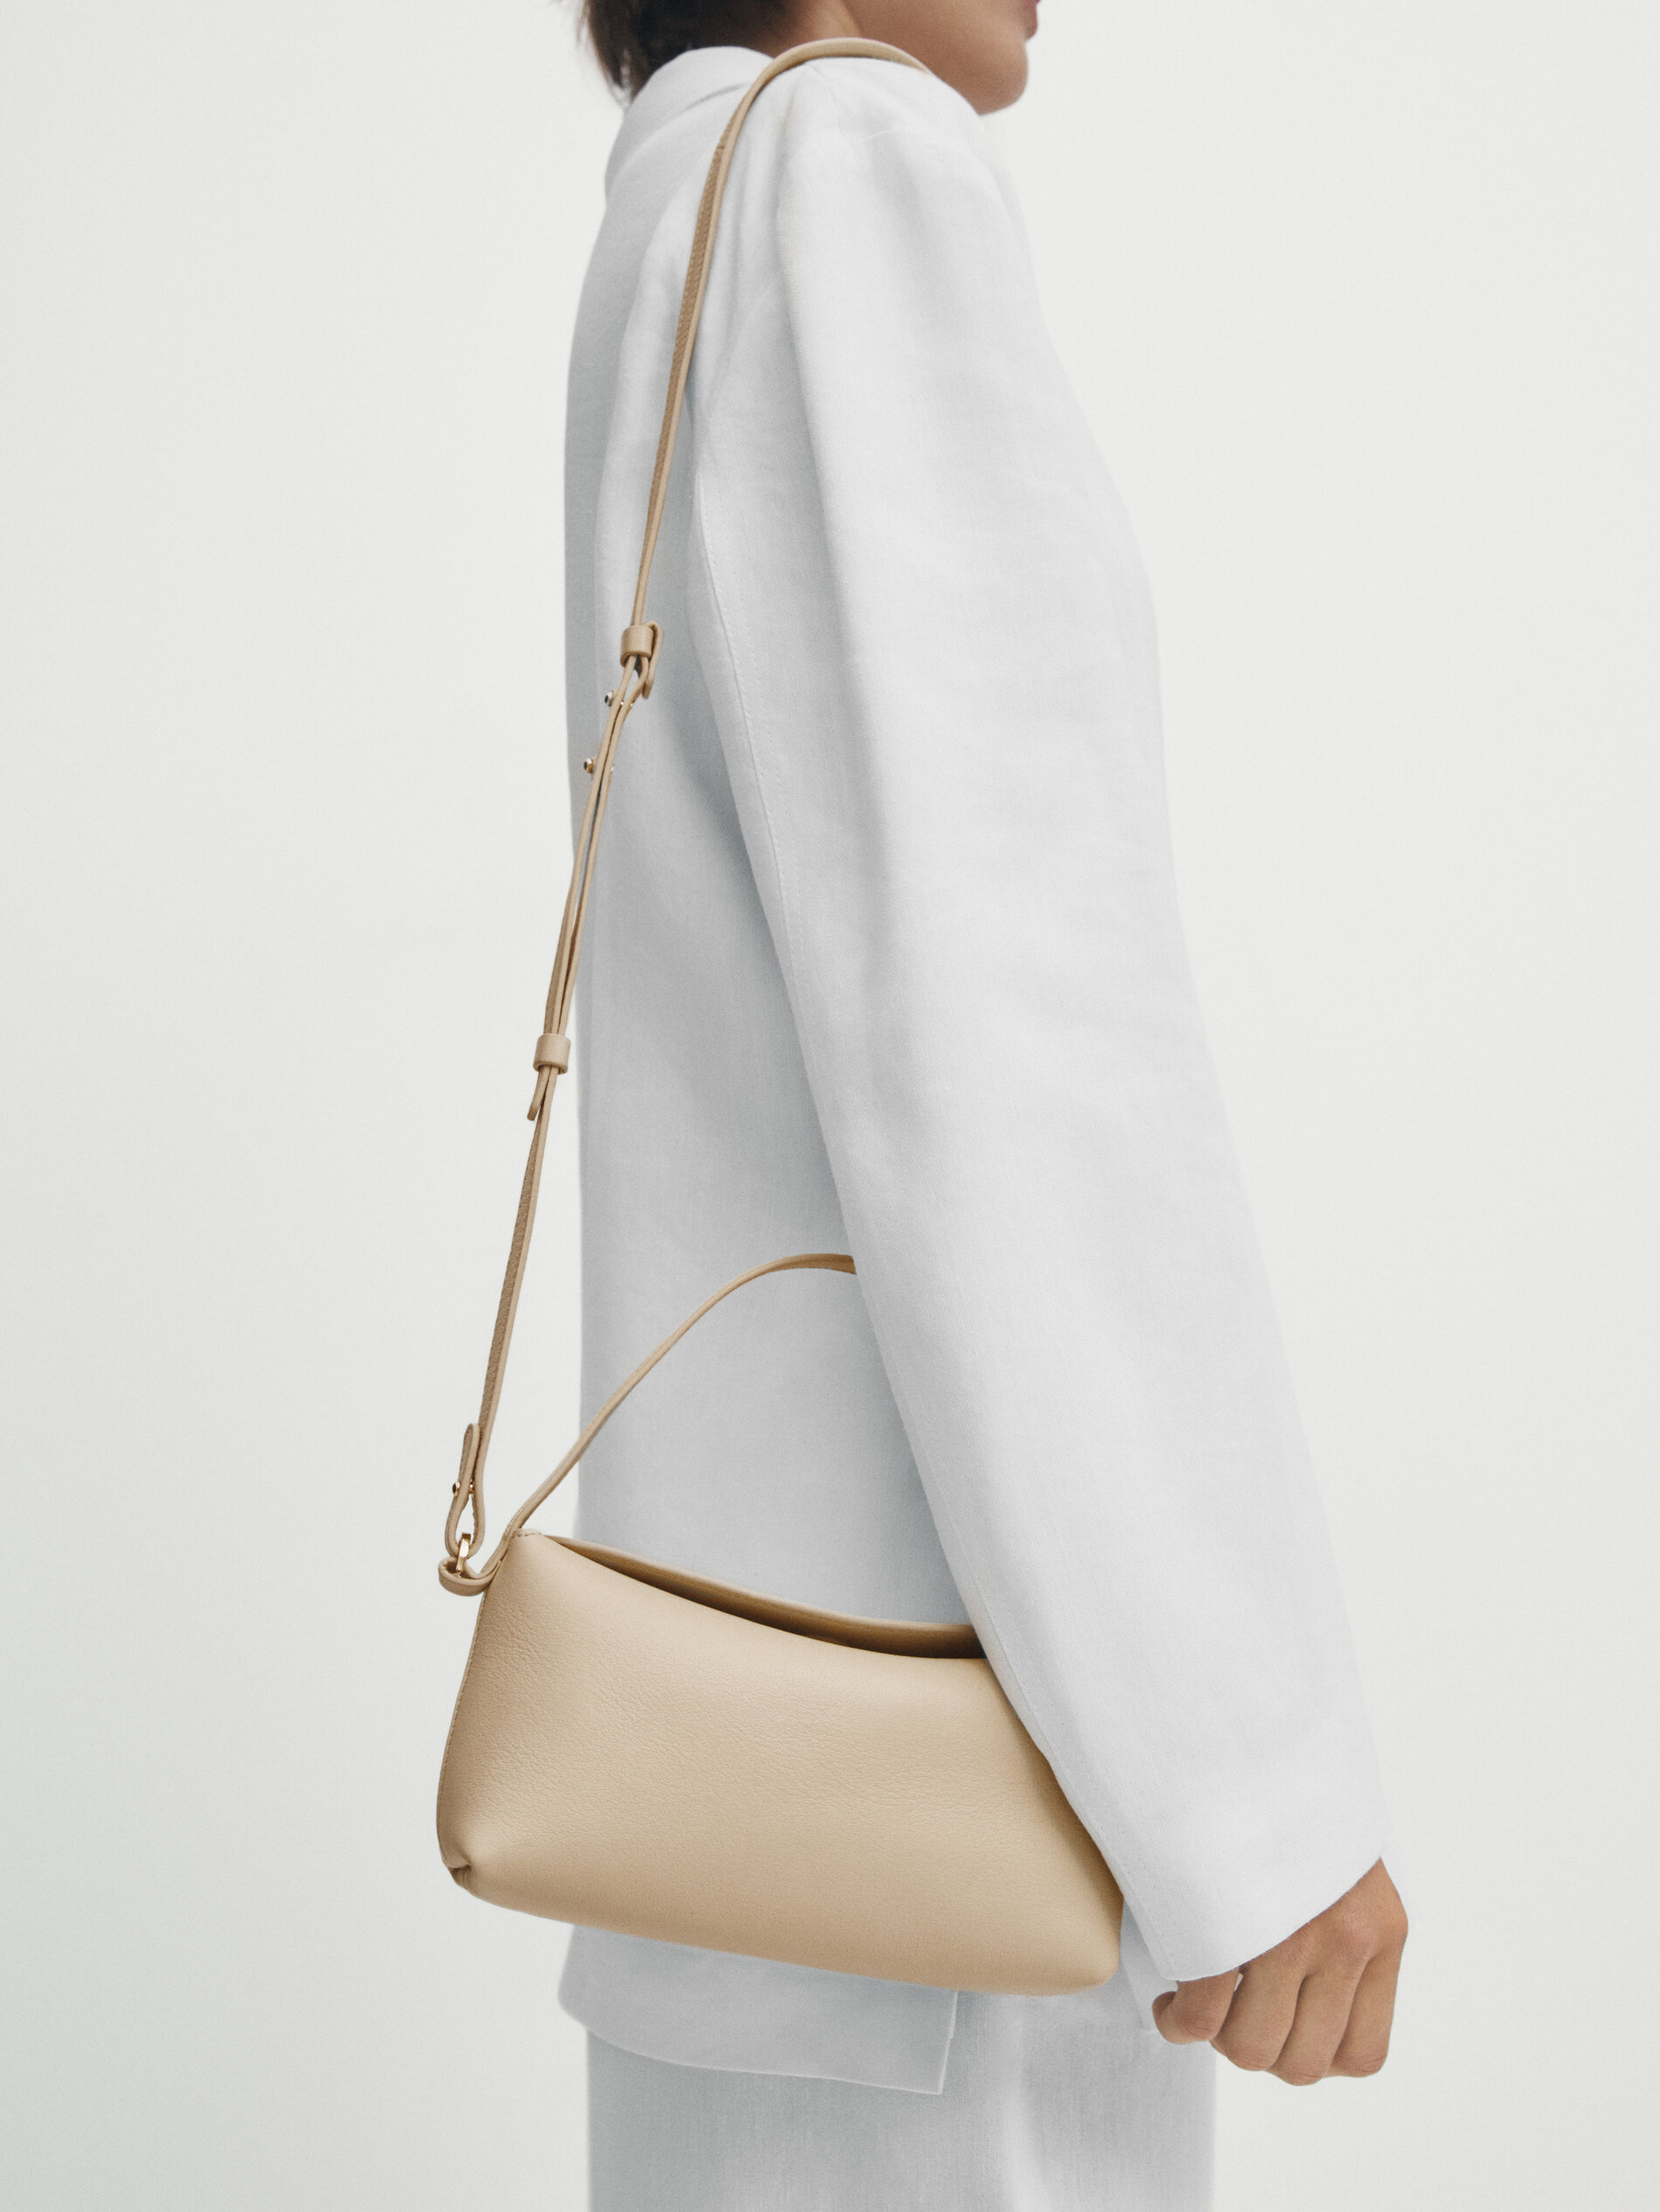 Massimo Dutti Handbags Can Easily Pass for Designer | Who What Wear